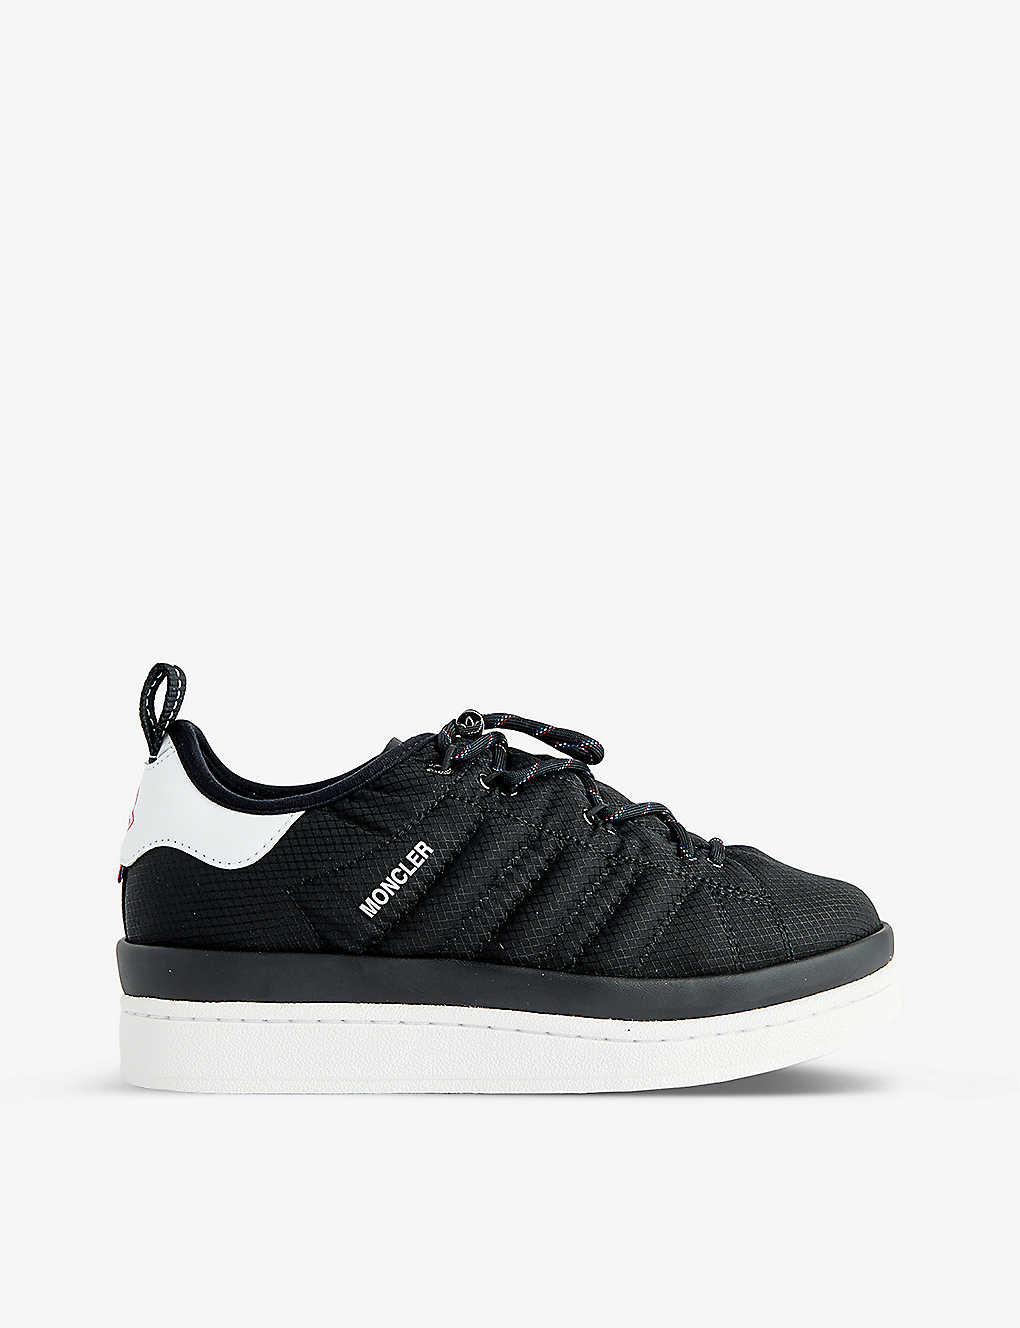 Moncler Genius Moncler X Adidas Campus Leather Sneakers In Black